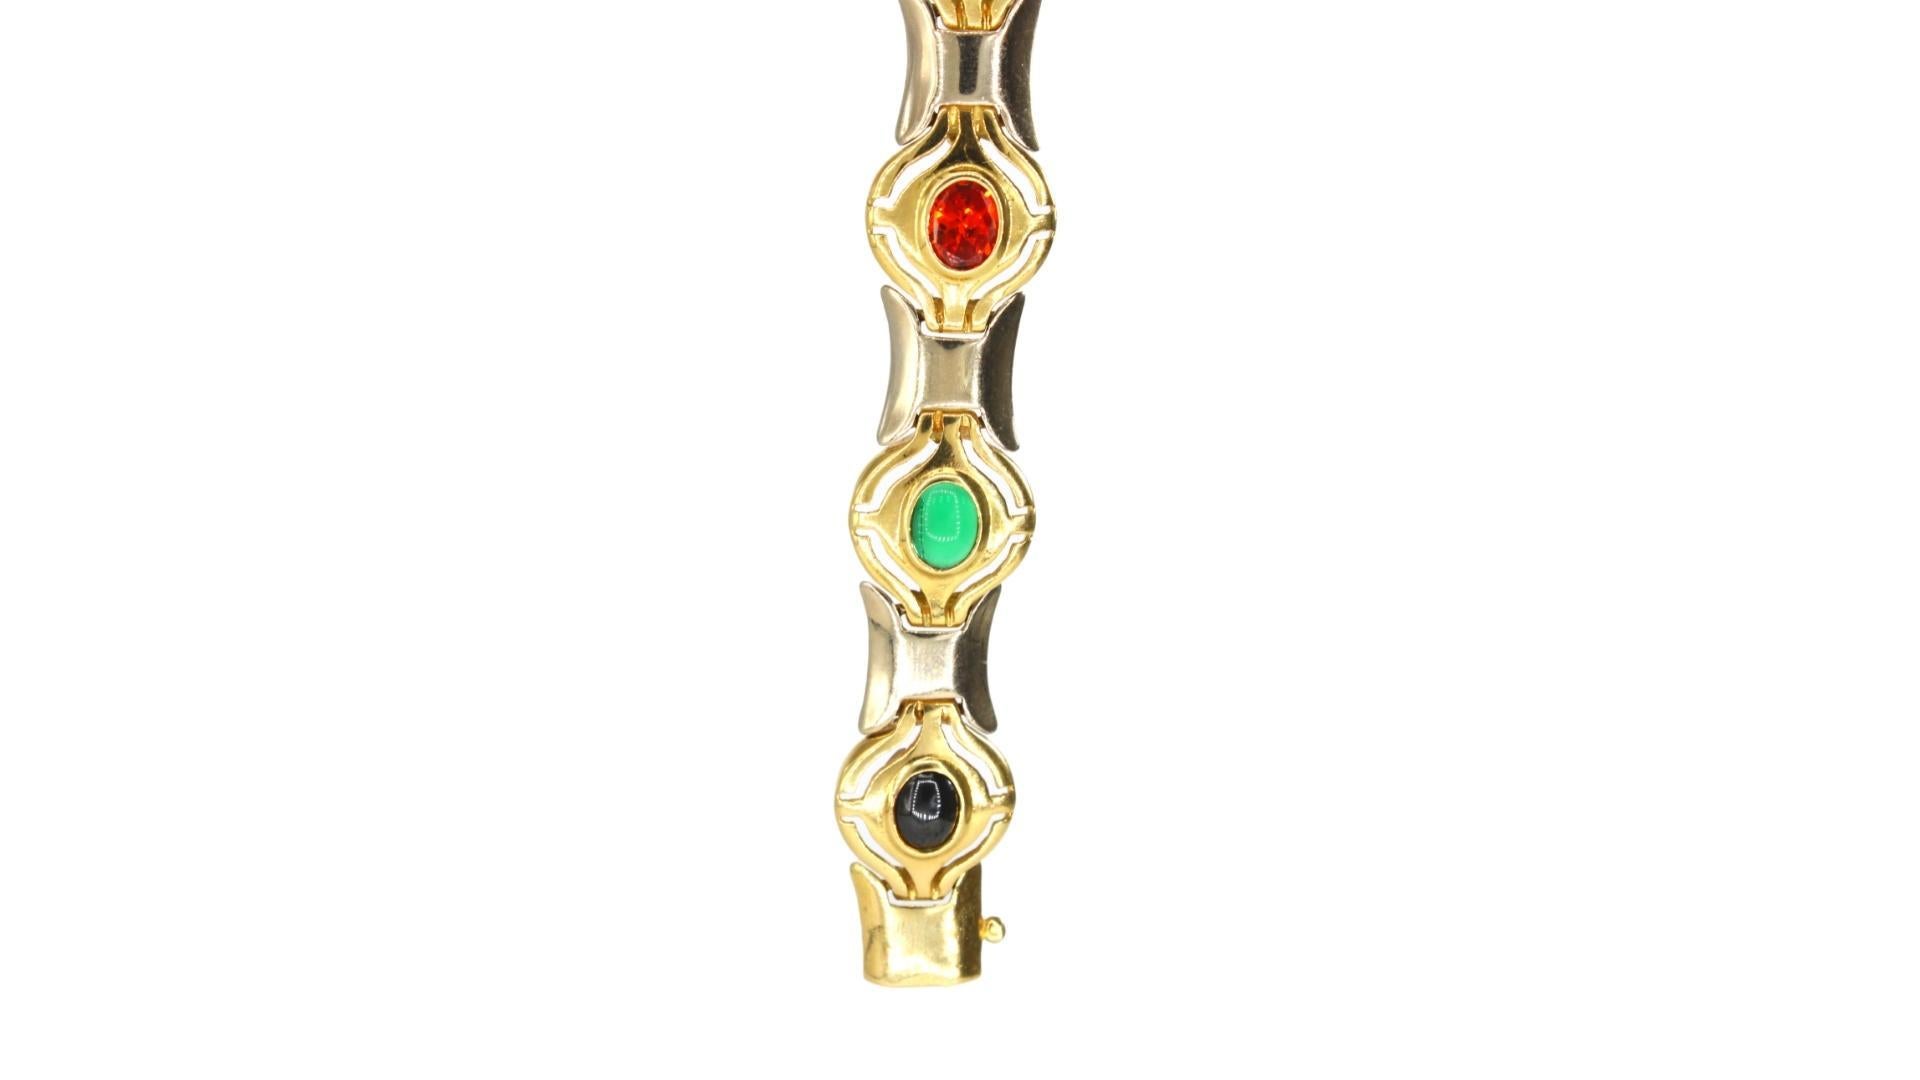 Multy Color Stones 14 Karat Yellow-White Gold Bracelet In Good Condition For Sale In Tel Aviv, IL